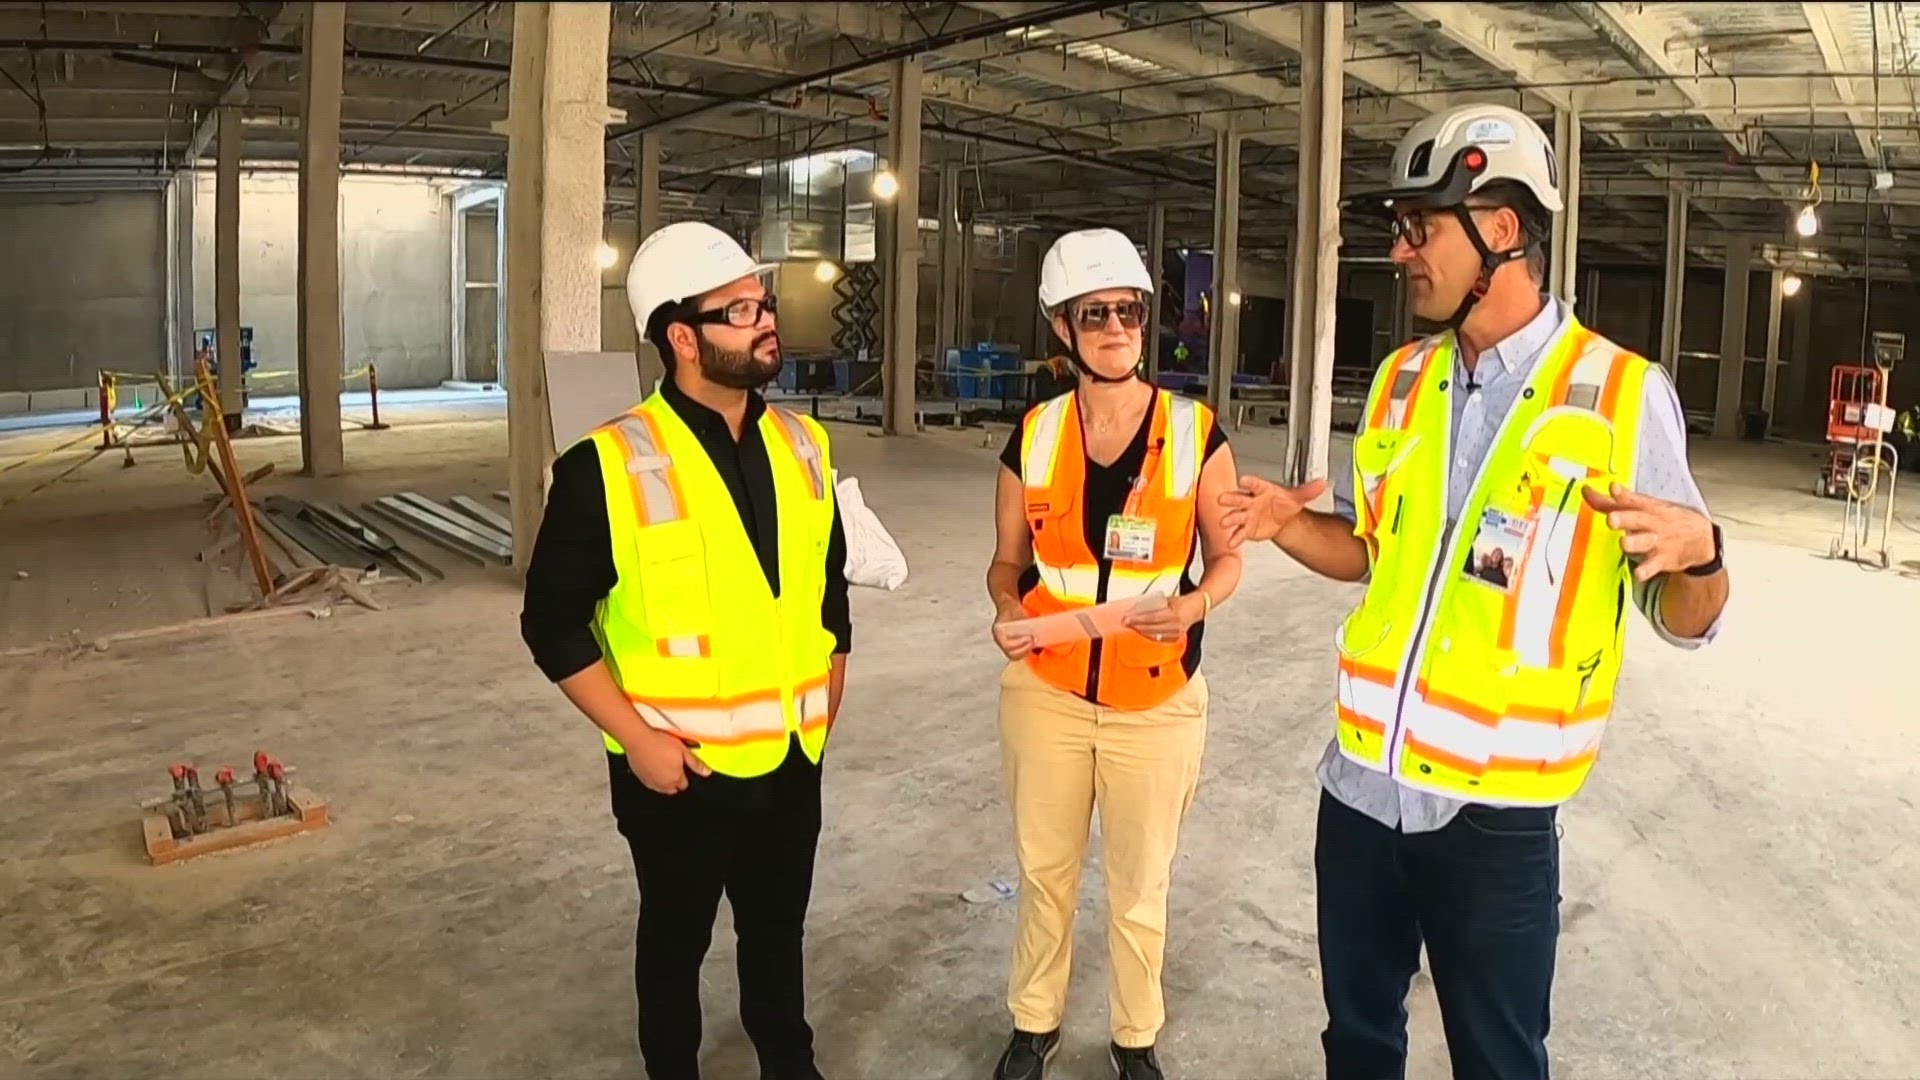 CBS 8 got an exclusive tour of the Hillcrest construction, which will house new Outpatient Pavilion, wellness and cancer centers, housing and more.